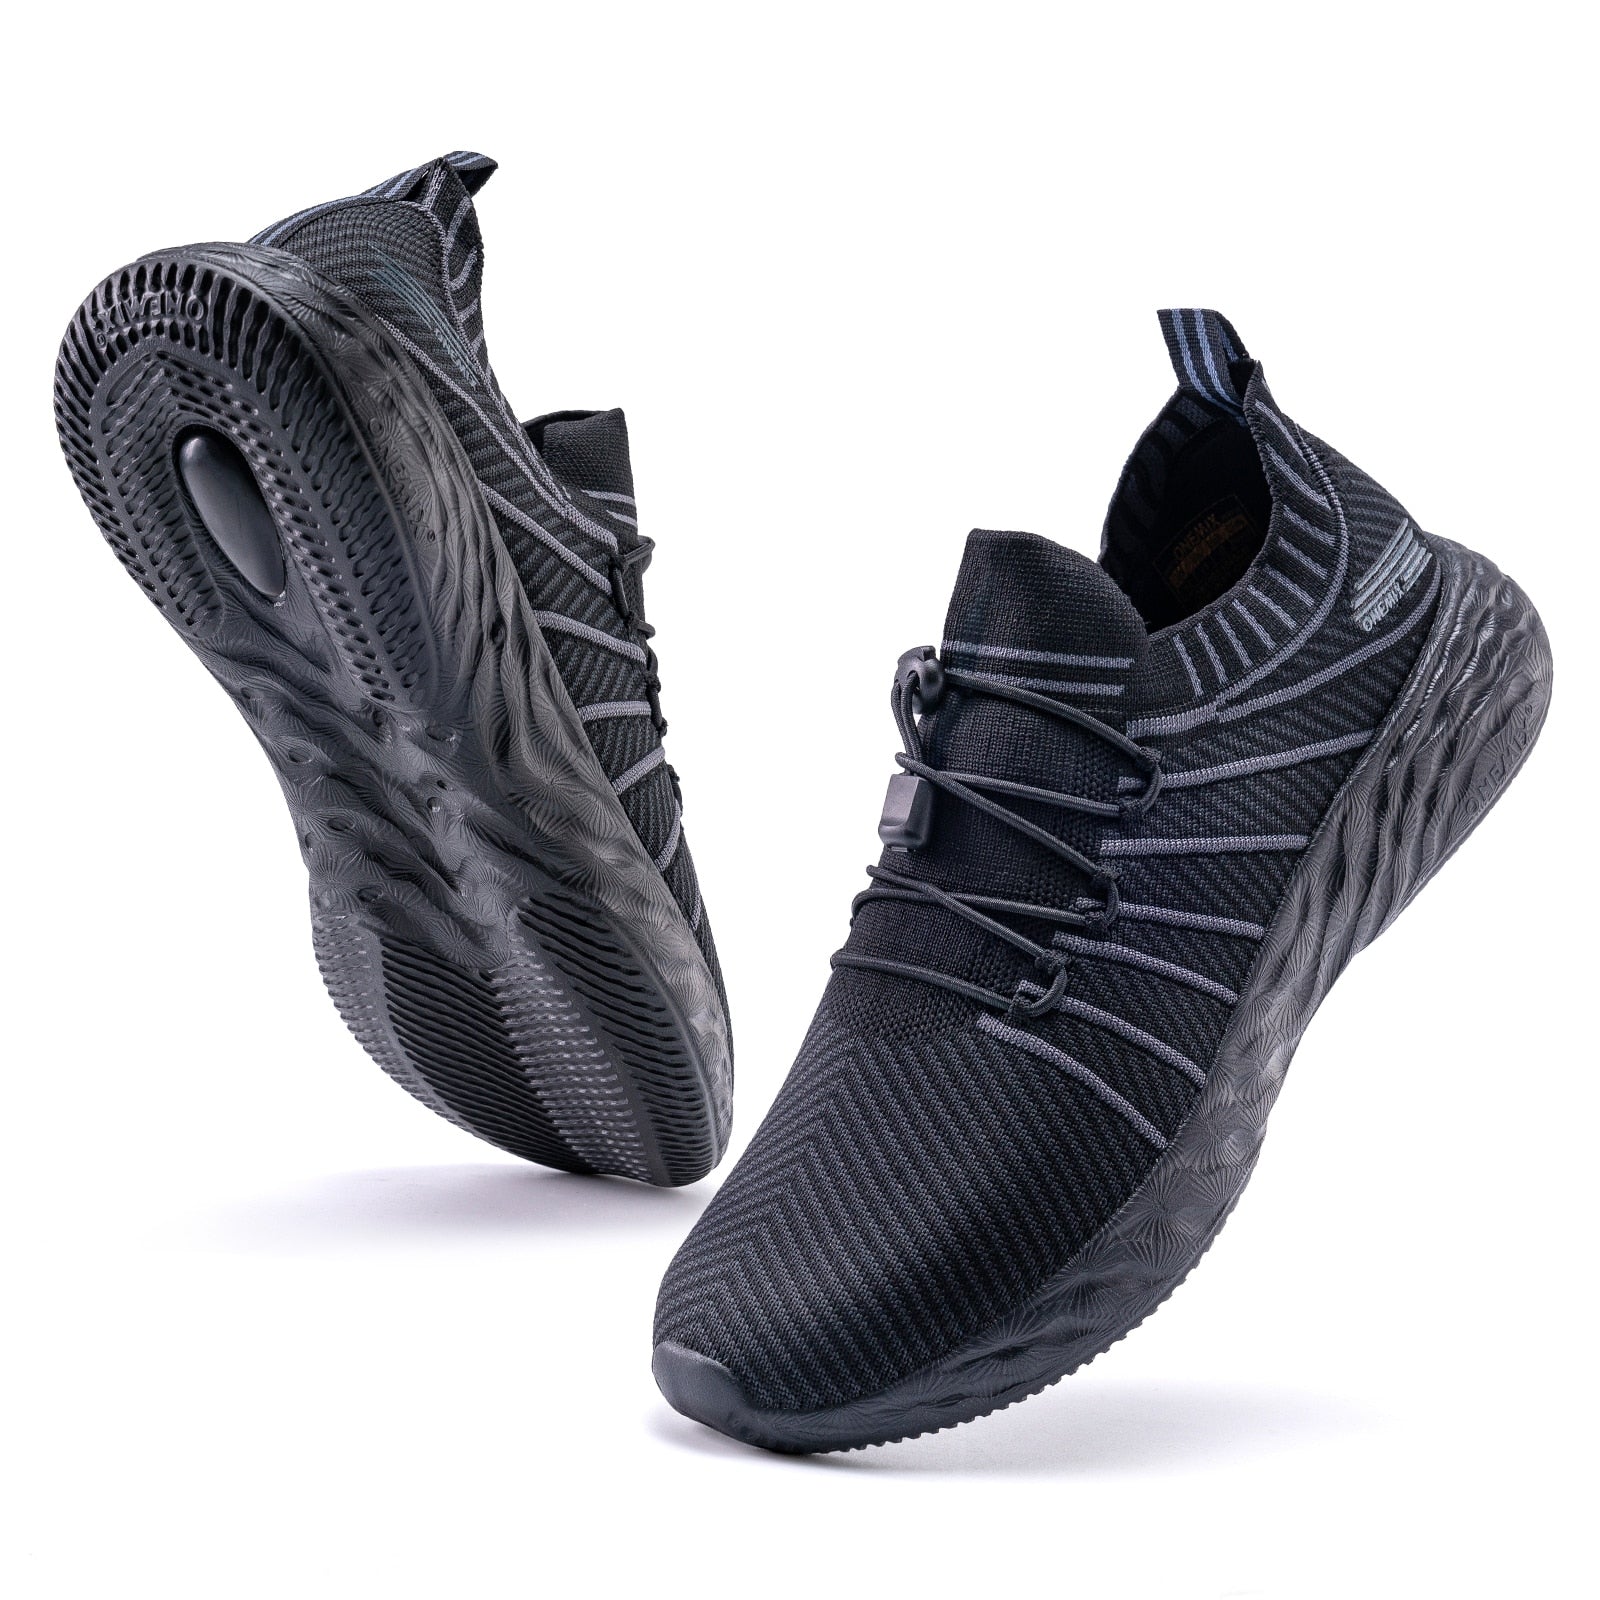 ONEMIX Black Flywire Waterproof Breathable Running and Hiking Shoes for Men